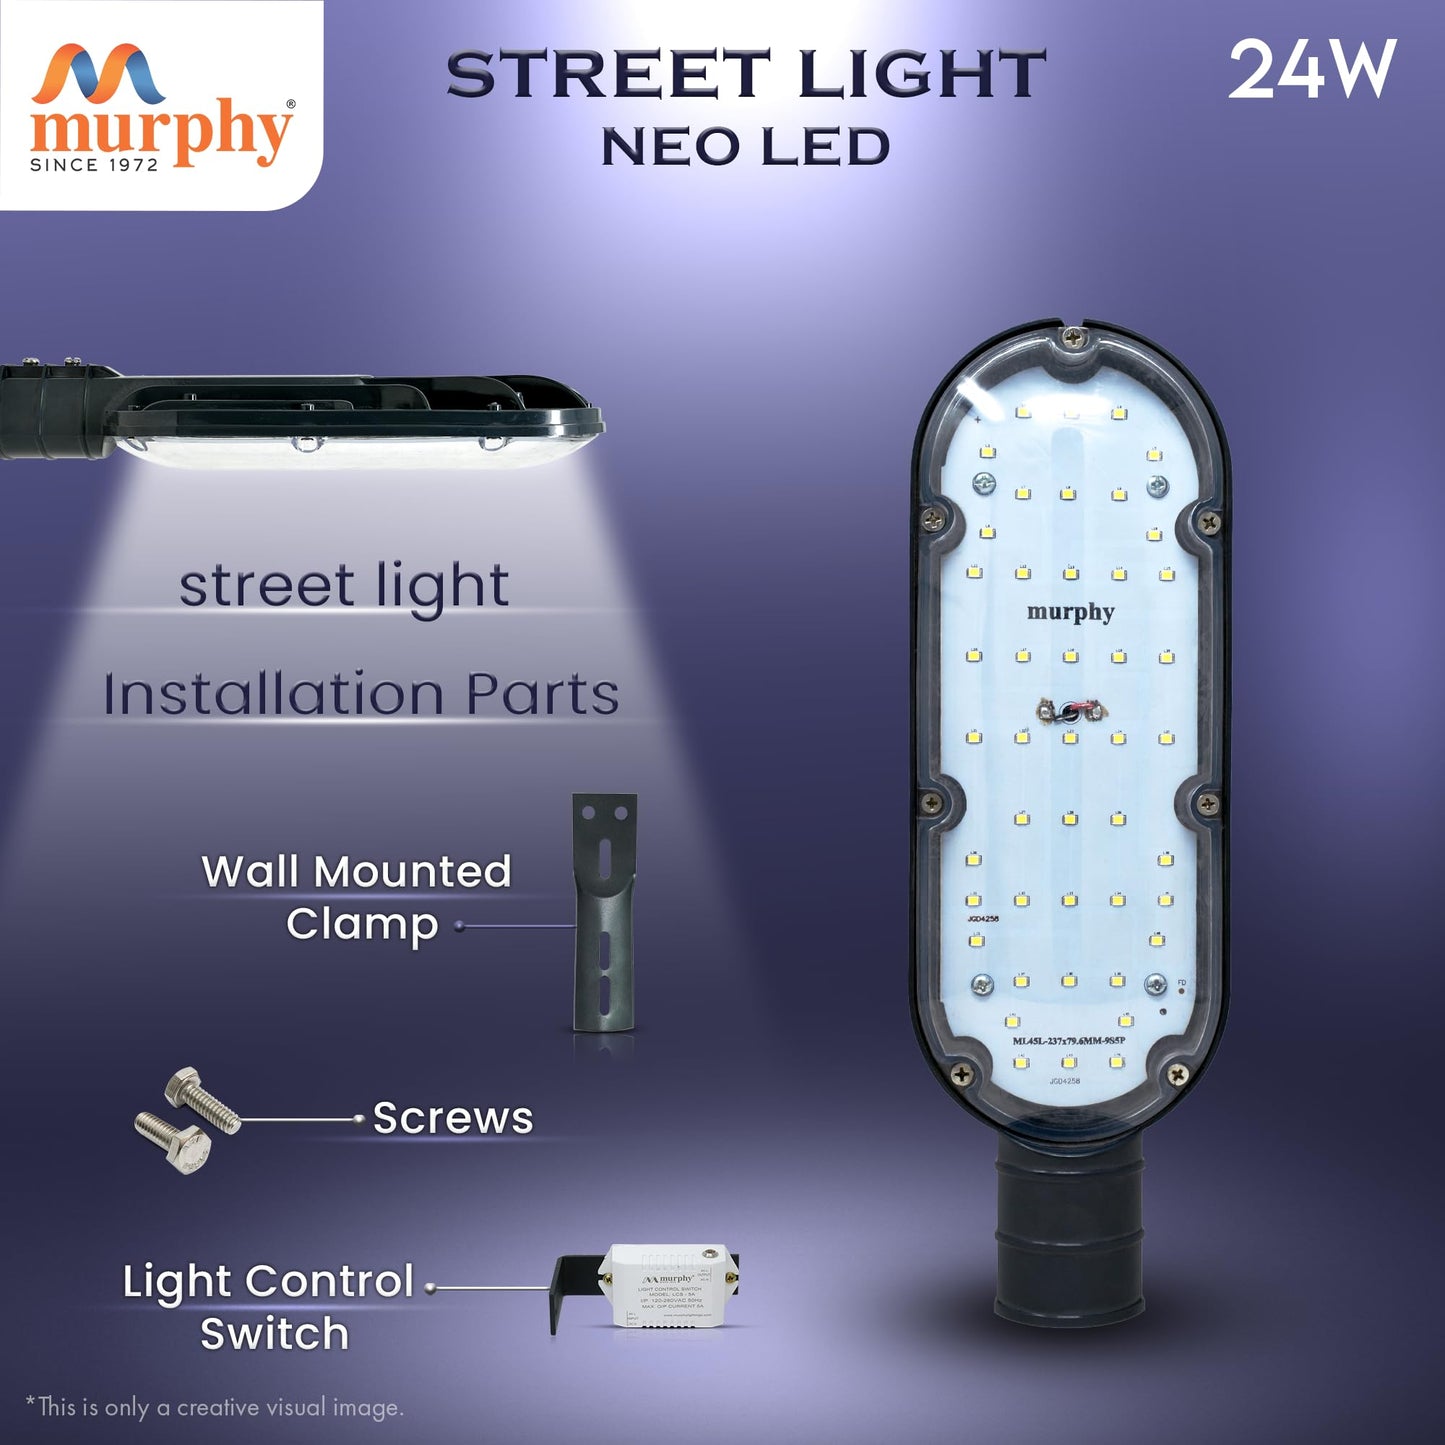 24W LED NEO Street Light -(PVC MODEL)- With Auto On Off Driver